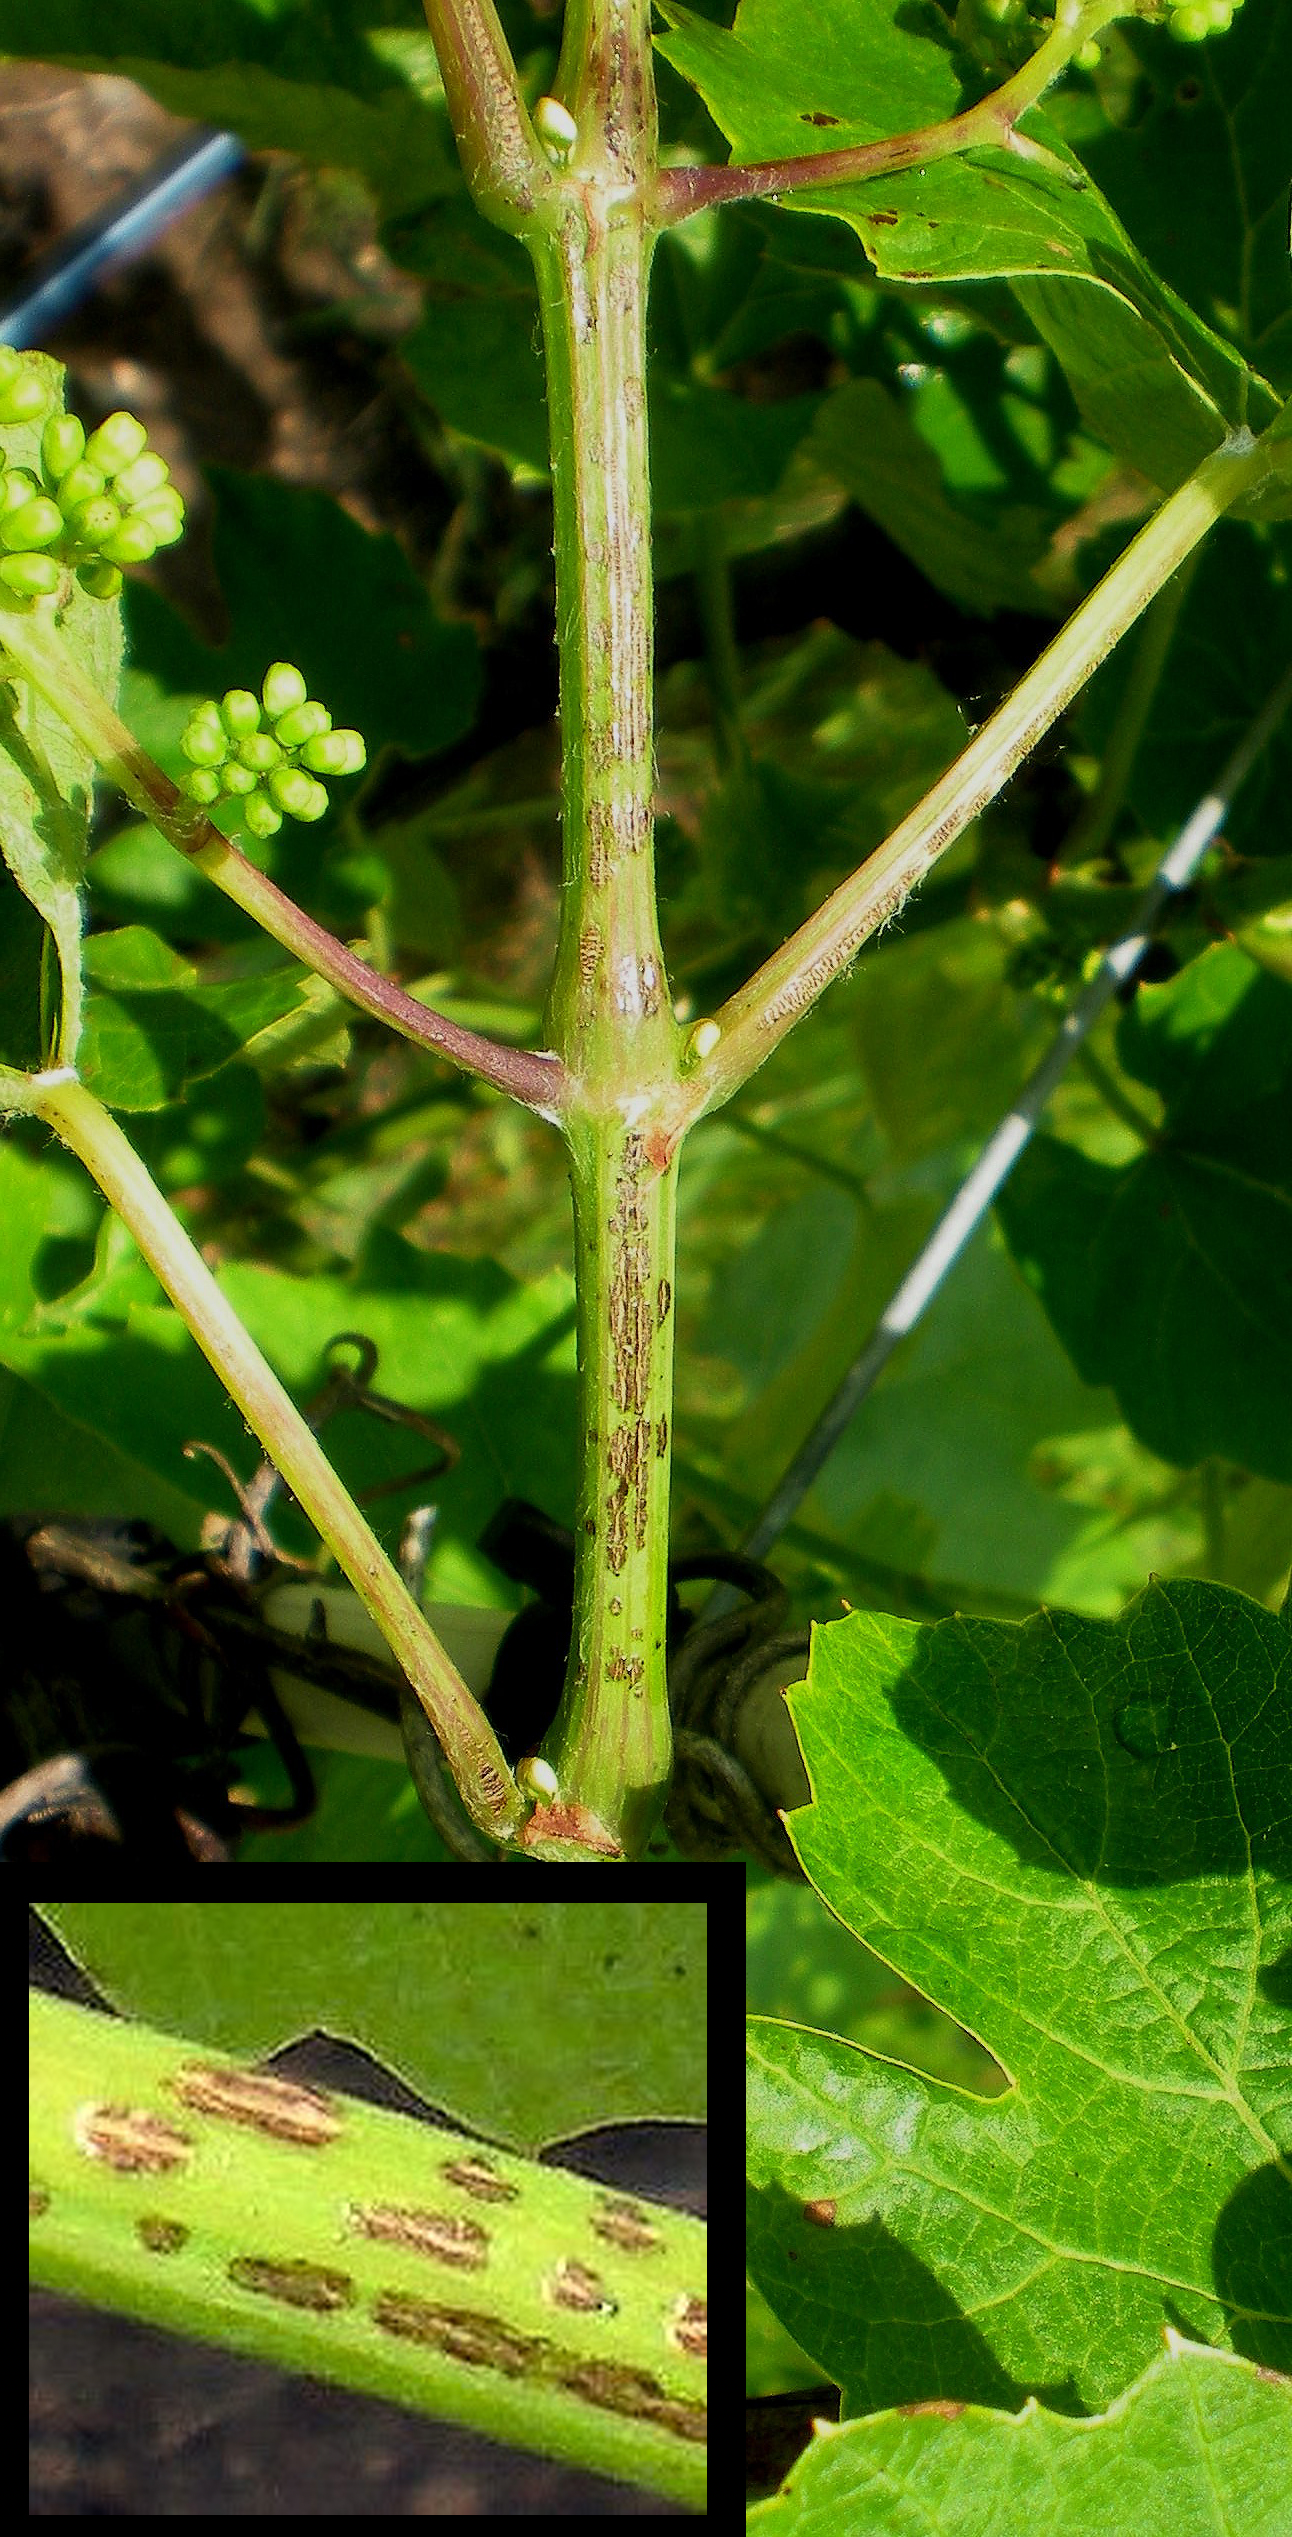 Photo grapevine showing shoots coming off the vine with phomopsis infections. Inset photo: Close-up of vine that shows lesions on the tissue.